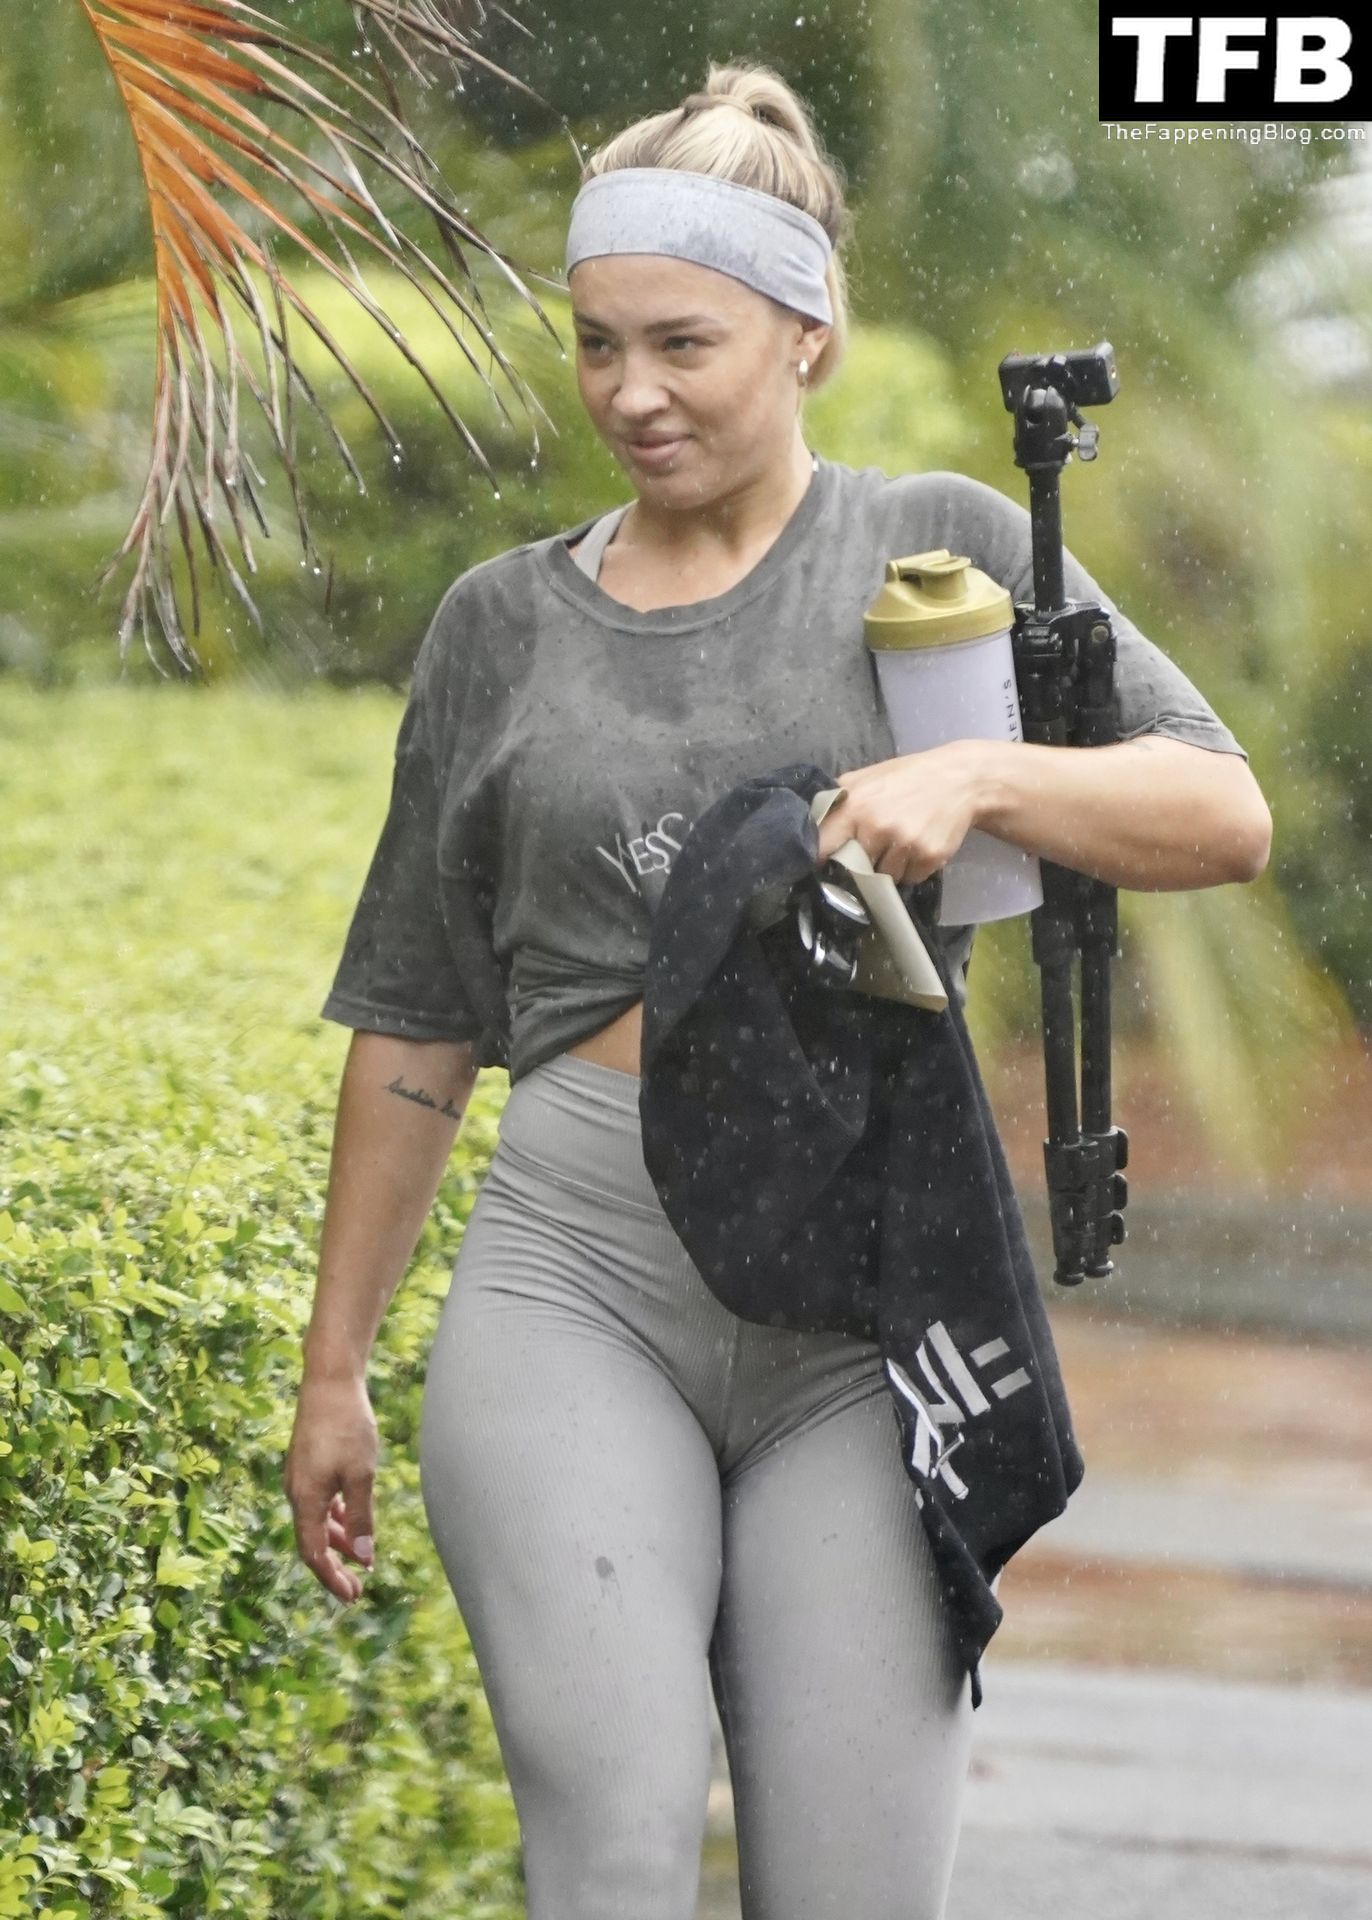 Newly-engaged-Tammy-Hembrow-leaves-the-gym-without-her-engagement-ring-on-during-a-rainy-day-in-Brisbane-The-Fappening-Blog-1.jpg